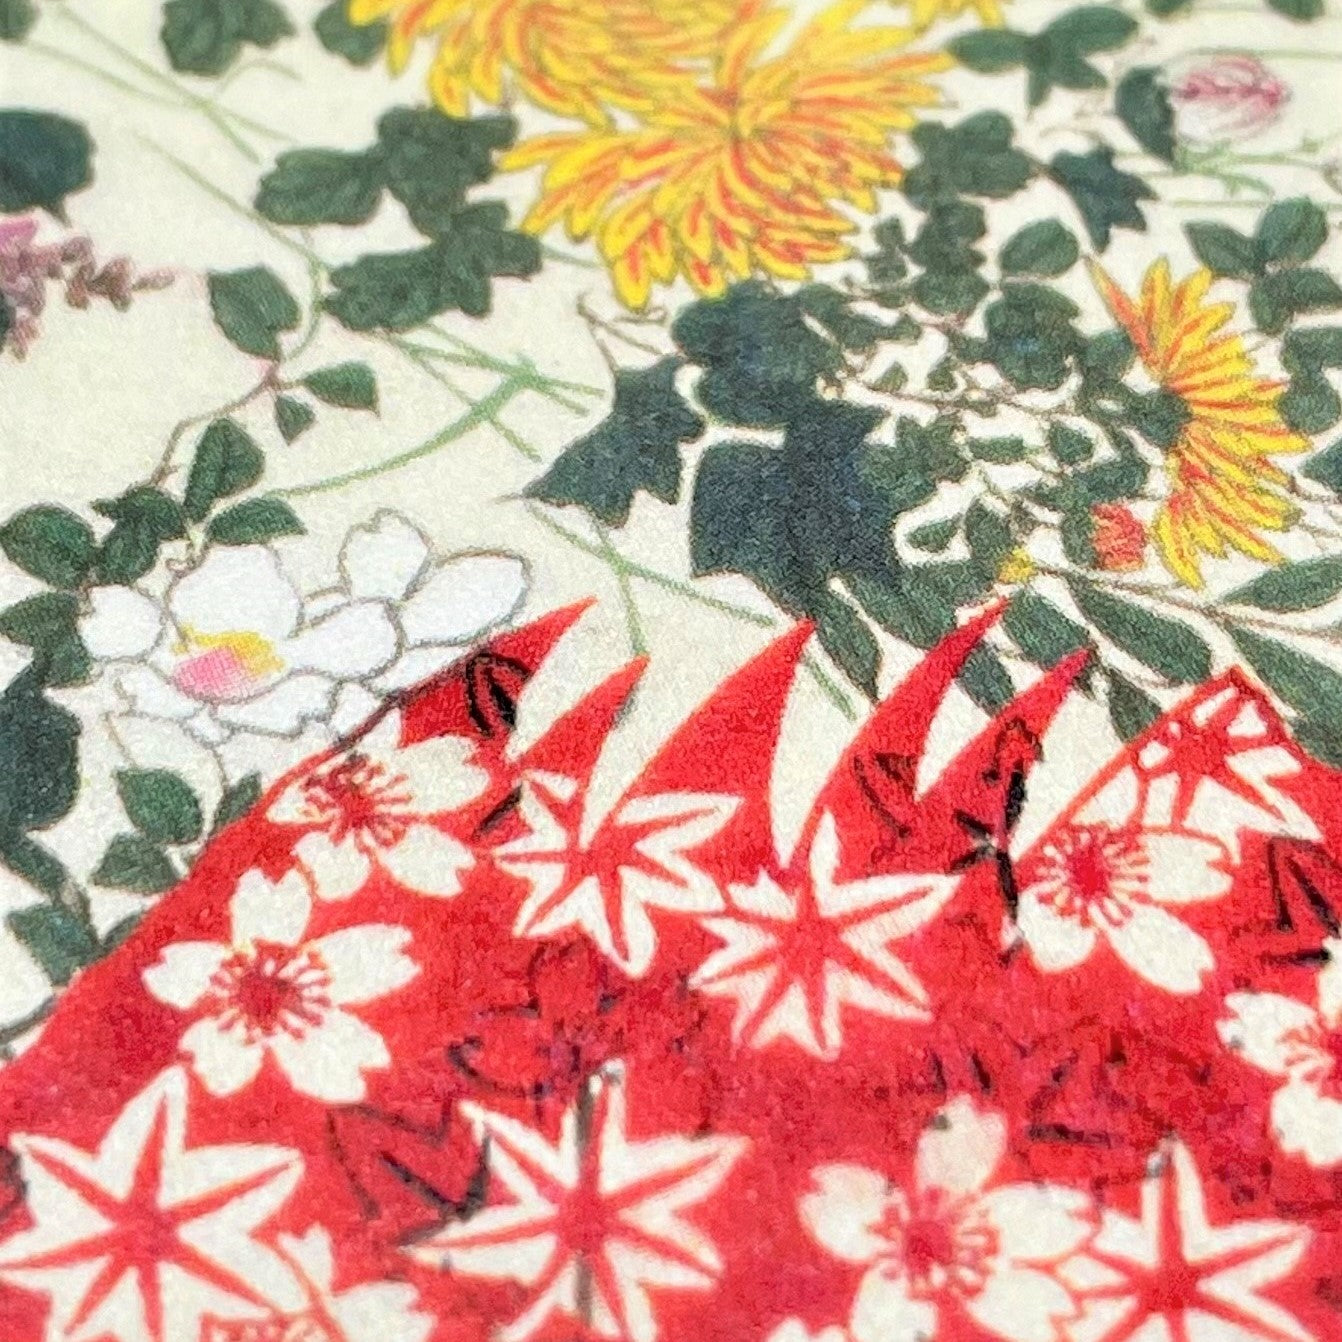 greetings card showing a drawing of a floral kimono in red, green and yellow, close up of the floral design